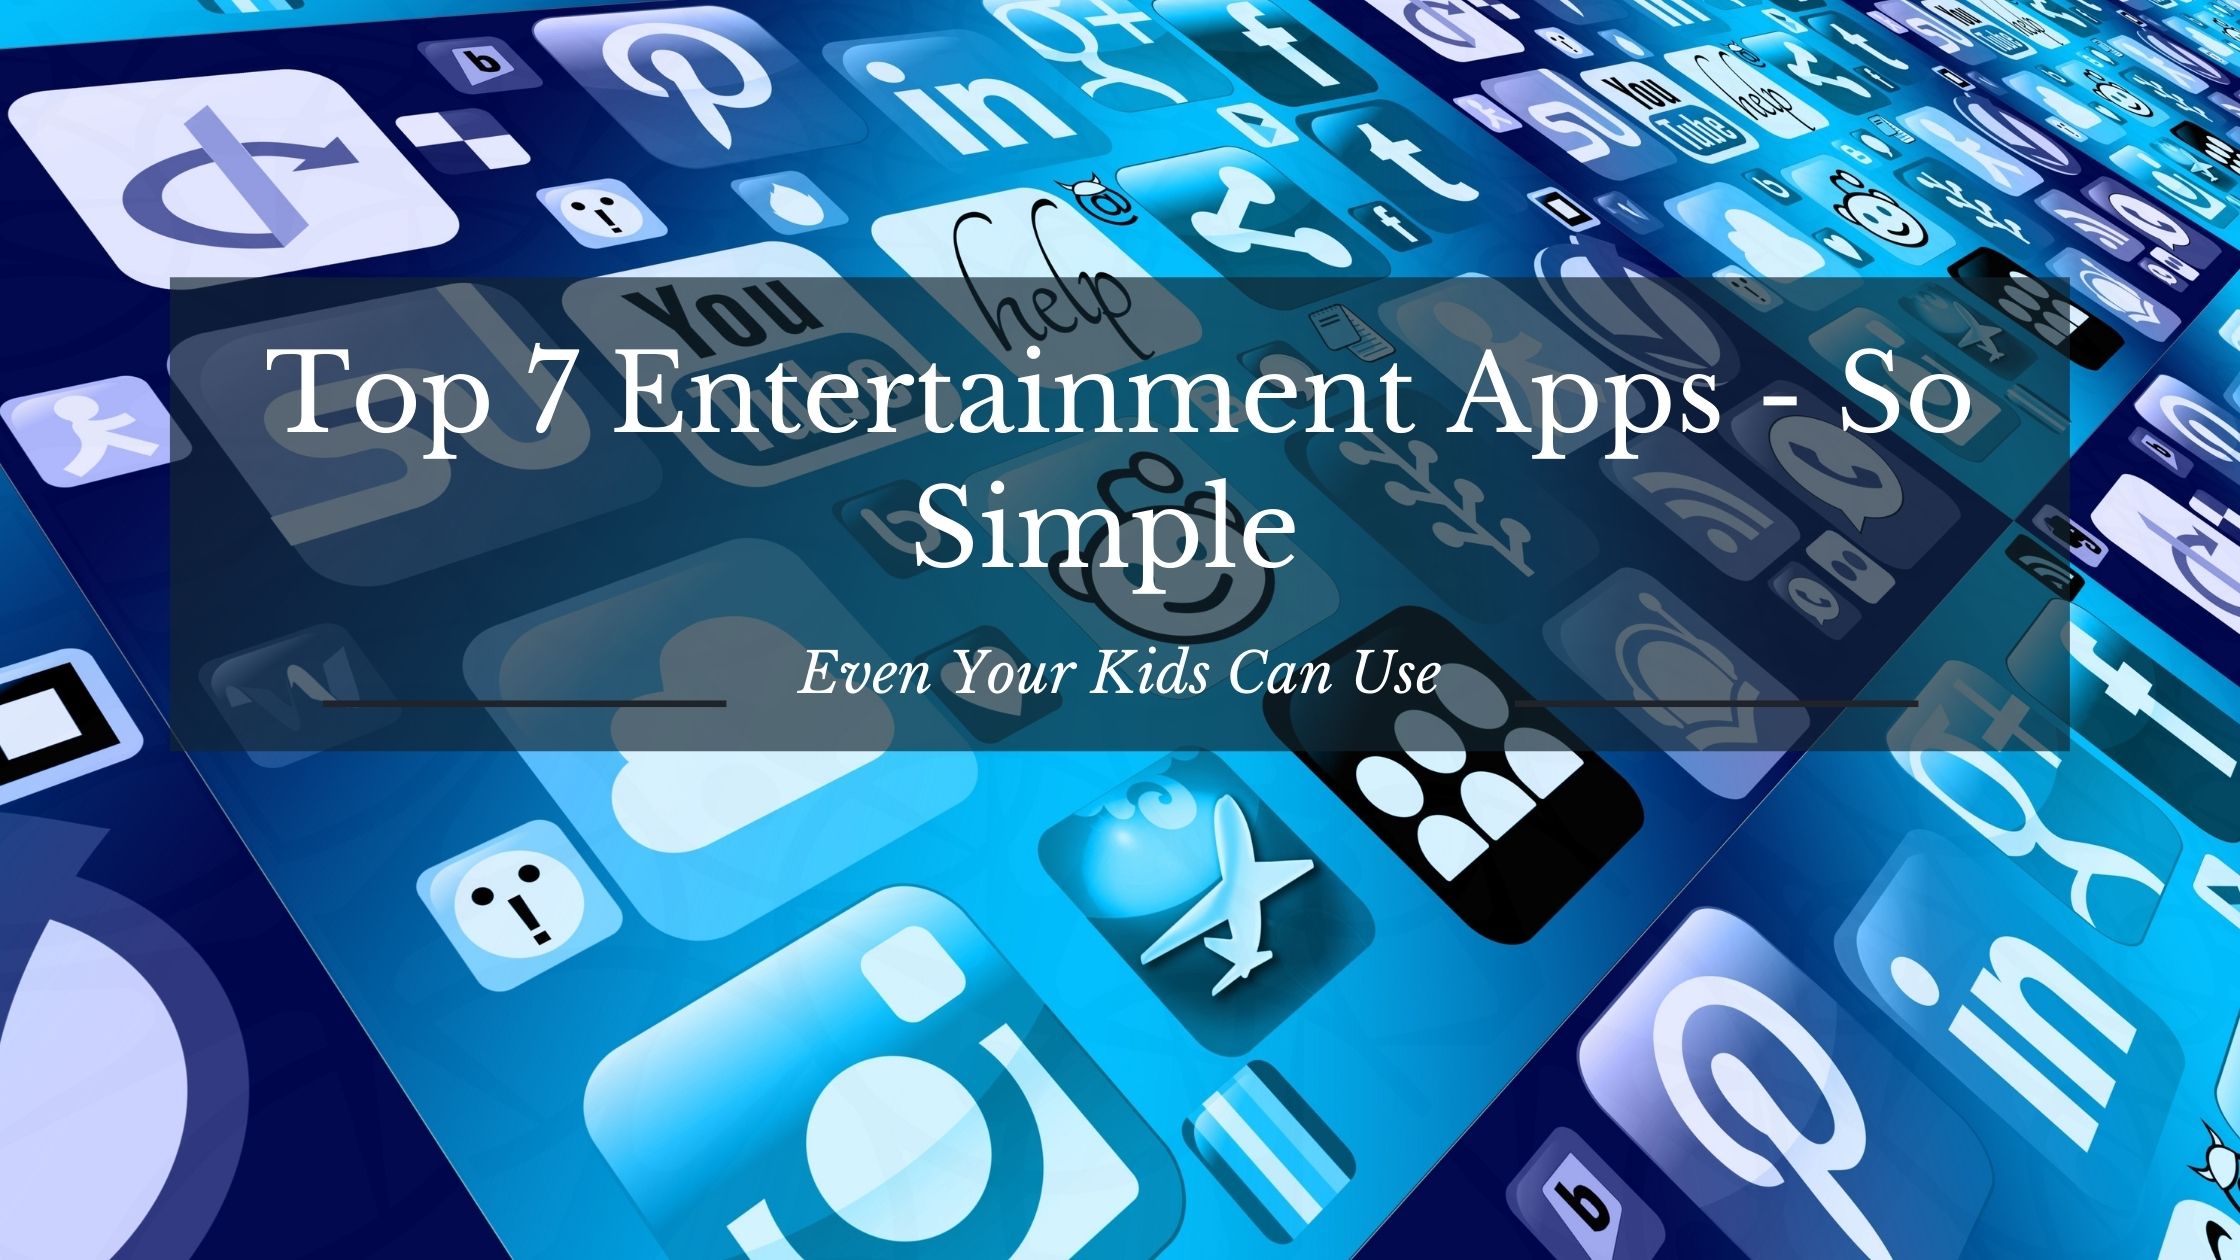 Top 7 Entertainment Apps - So Simple